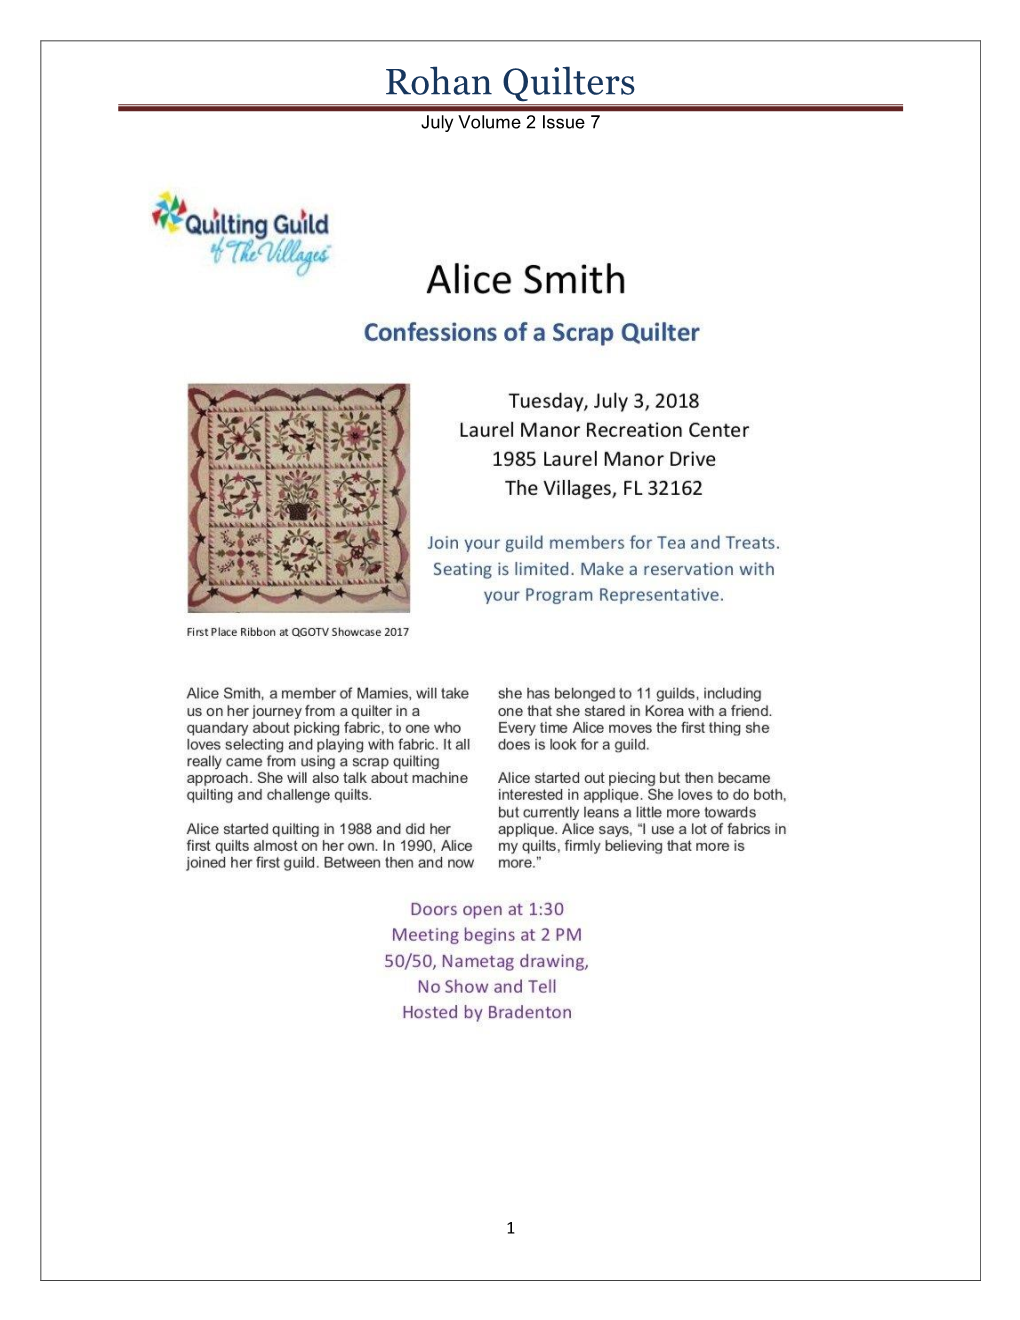 Rohan Quilters July Volume 2 Issue 7